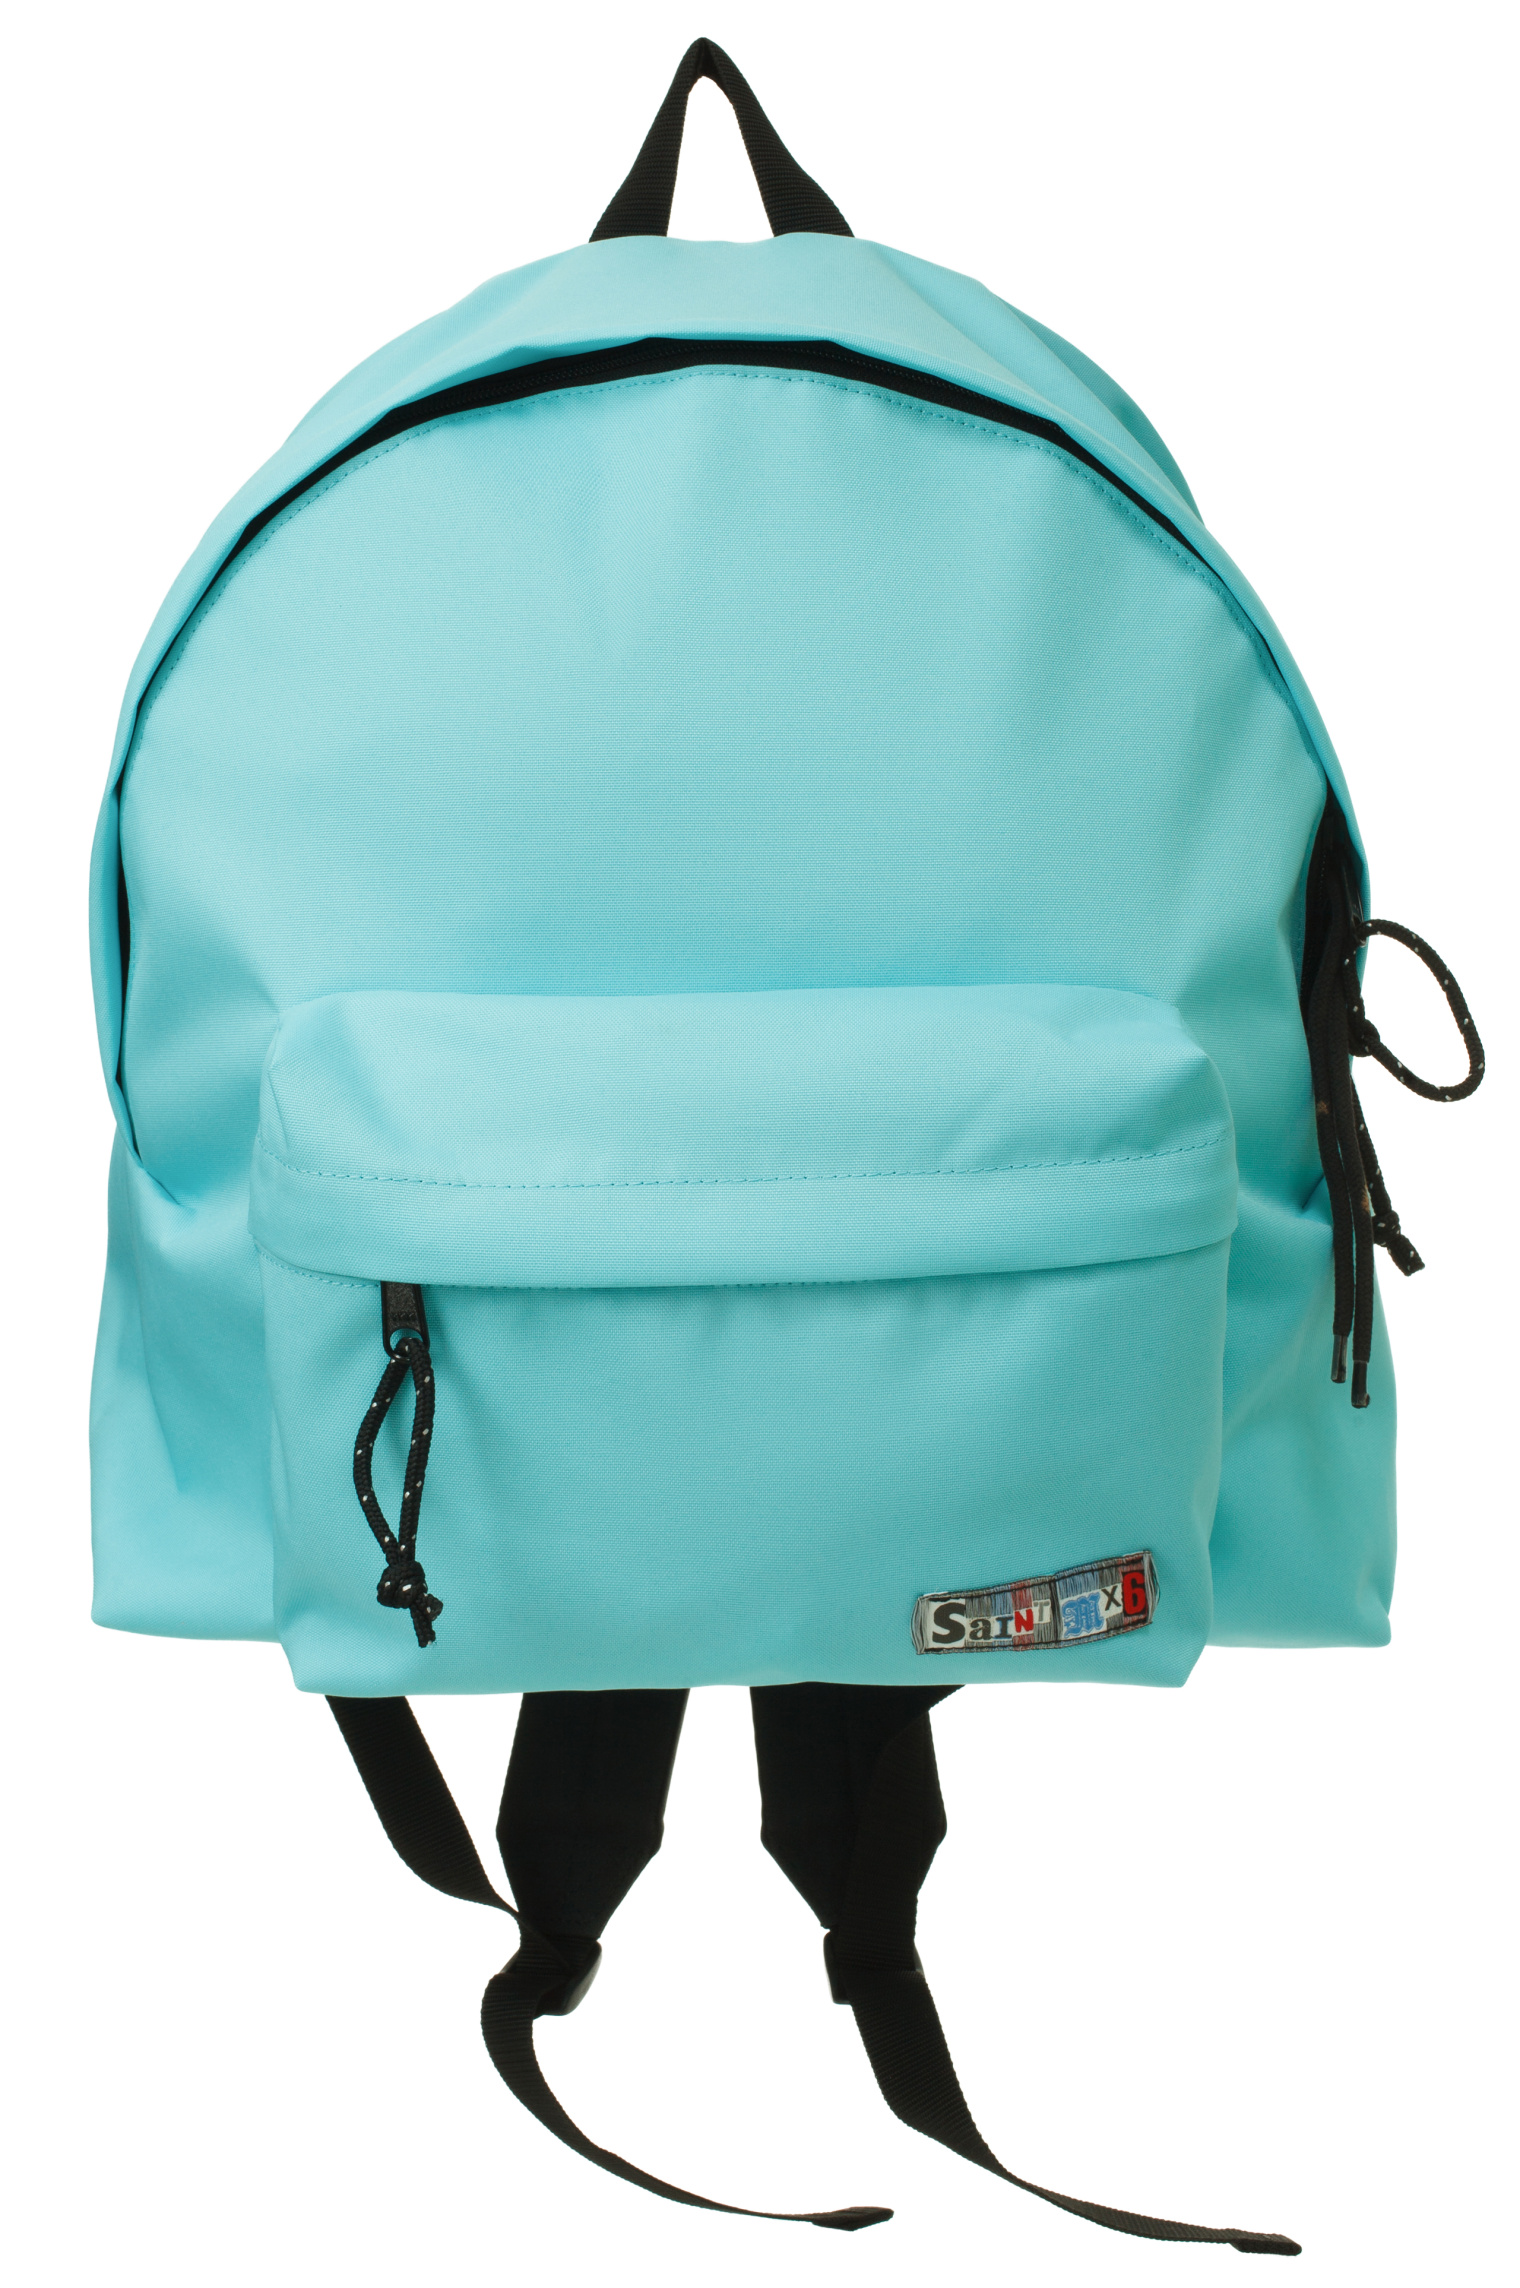 Saint Michael Medium backpack  with logo patch